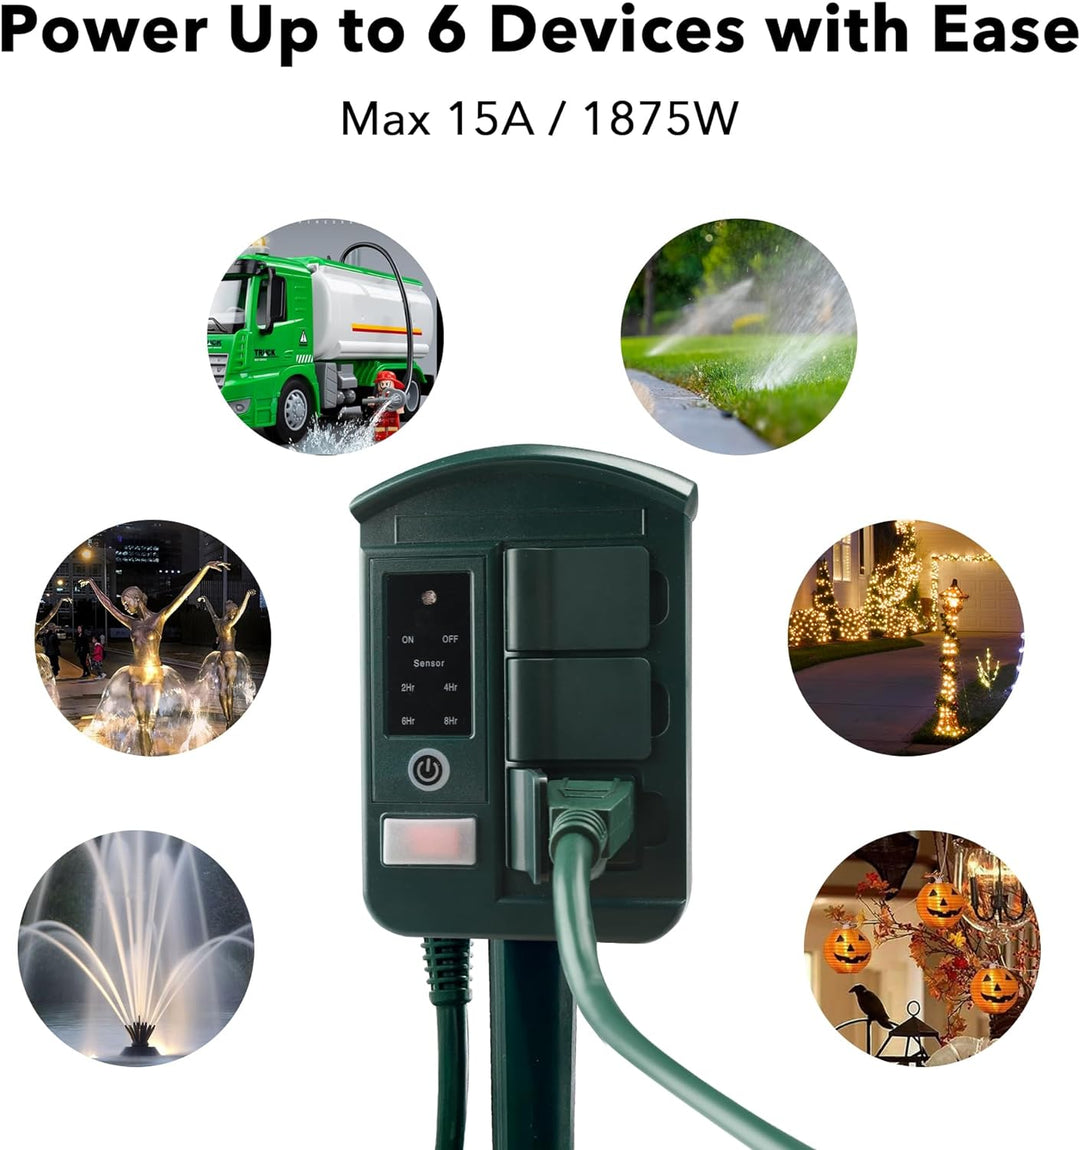 Remote Control Outdoor Power Stake Timer Waterproof Power Strip 6 Grounded Outlets and 6ft Extension Cord BN-LINK